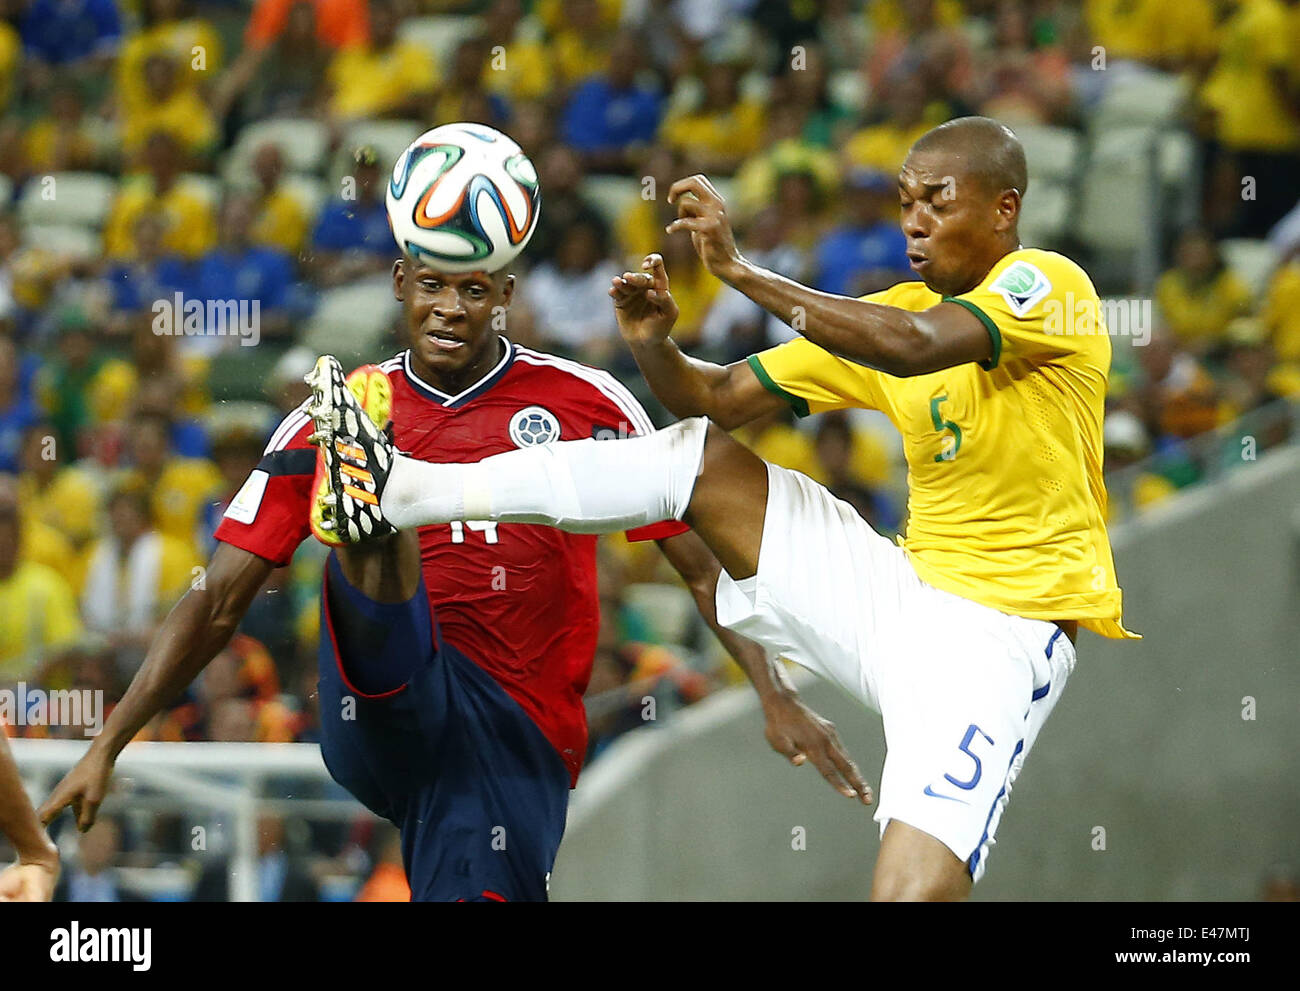 Fortaleza, Brazil. 4th July, 2014. Brazil's Fernandinho vies with Colombia's Victor Ibarbo during a quarter-finals match between Brazil and Colombia of 2014 FIFA World Cup at the Estadio Castelao Stadium in Fortaleza, Brazil, on July 4, 2014. Credit:  Chen Jianli/Xinhua/Alamy Live News Stock Photo